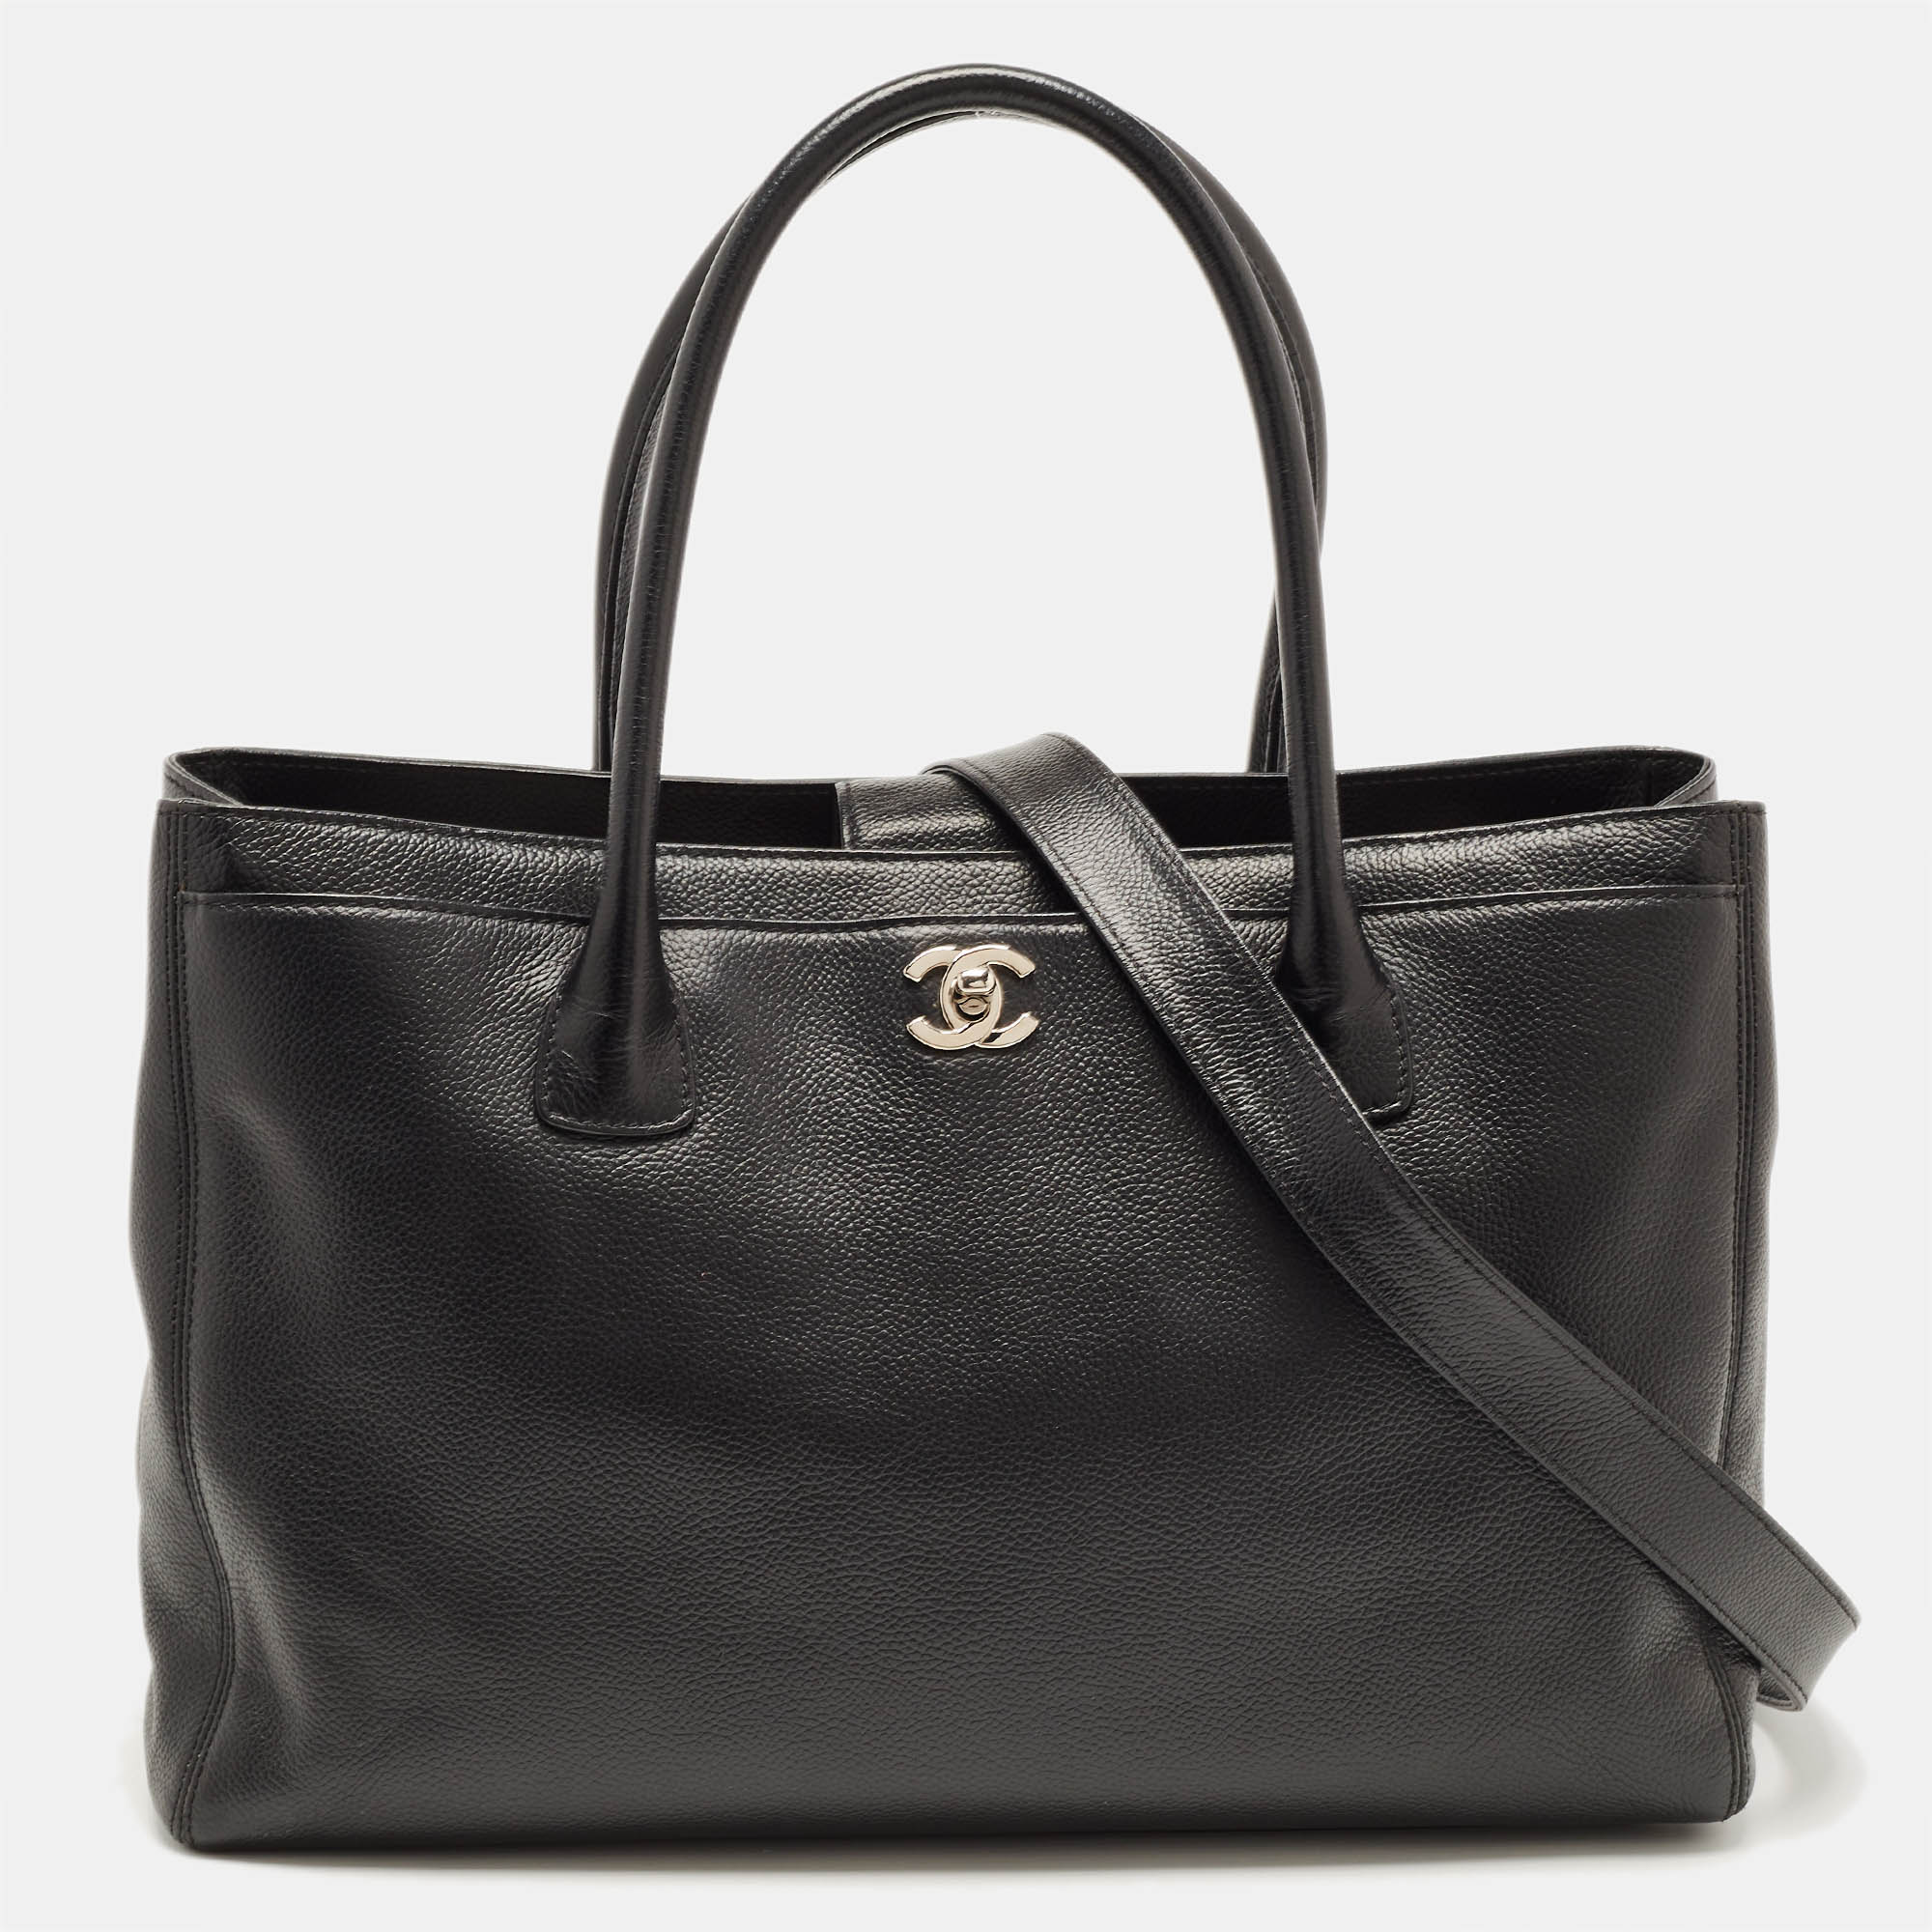 Chanel black leather cerf shopper tote